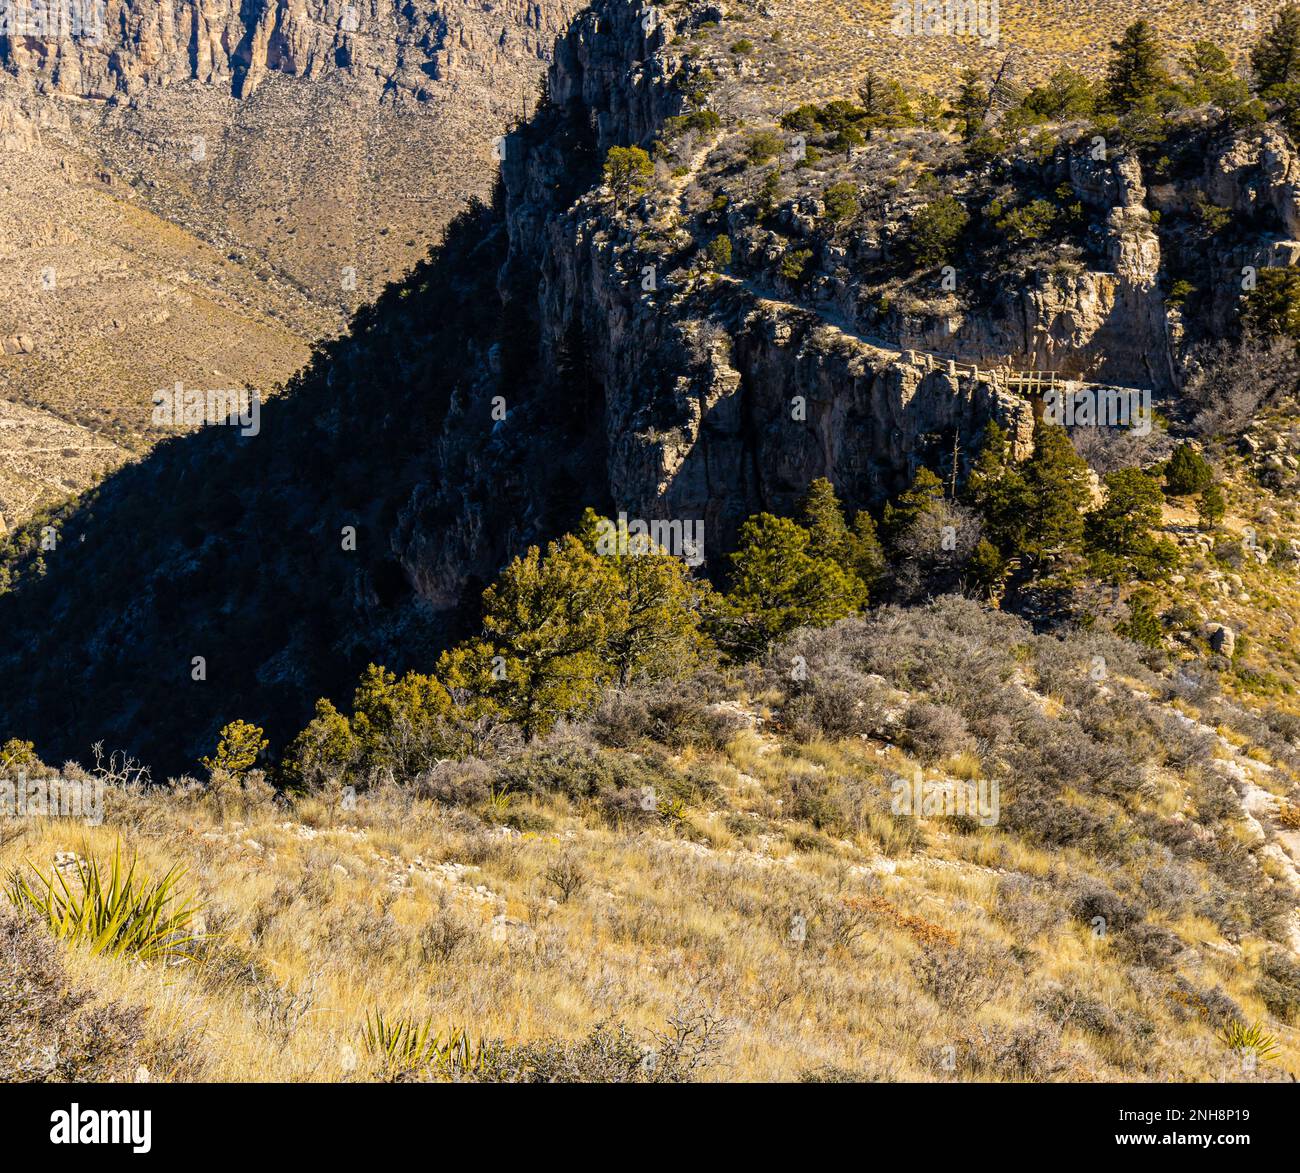 The Guadalupe Peak Trail Above The Valley Floor, Guadalupe Mountains National Park, Texas, USA Stock Photo